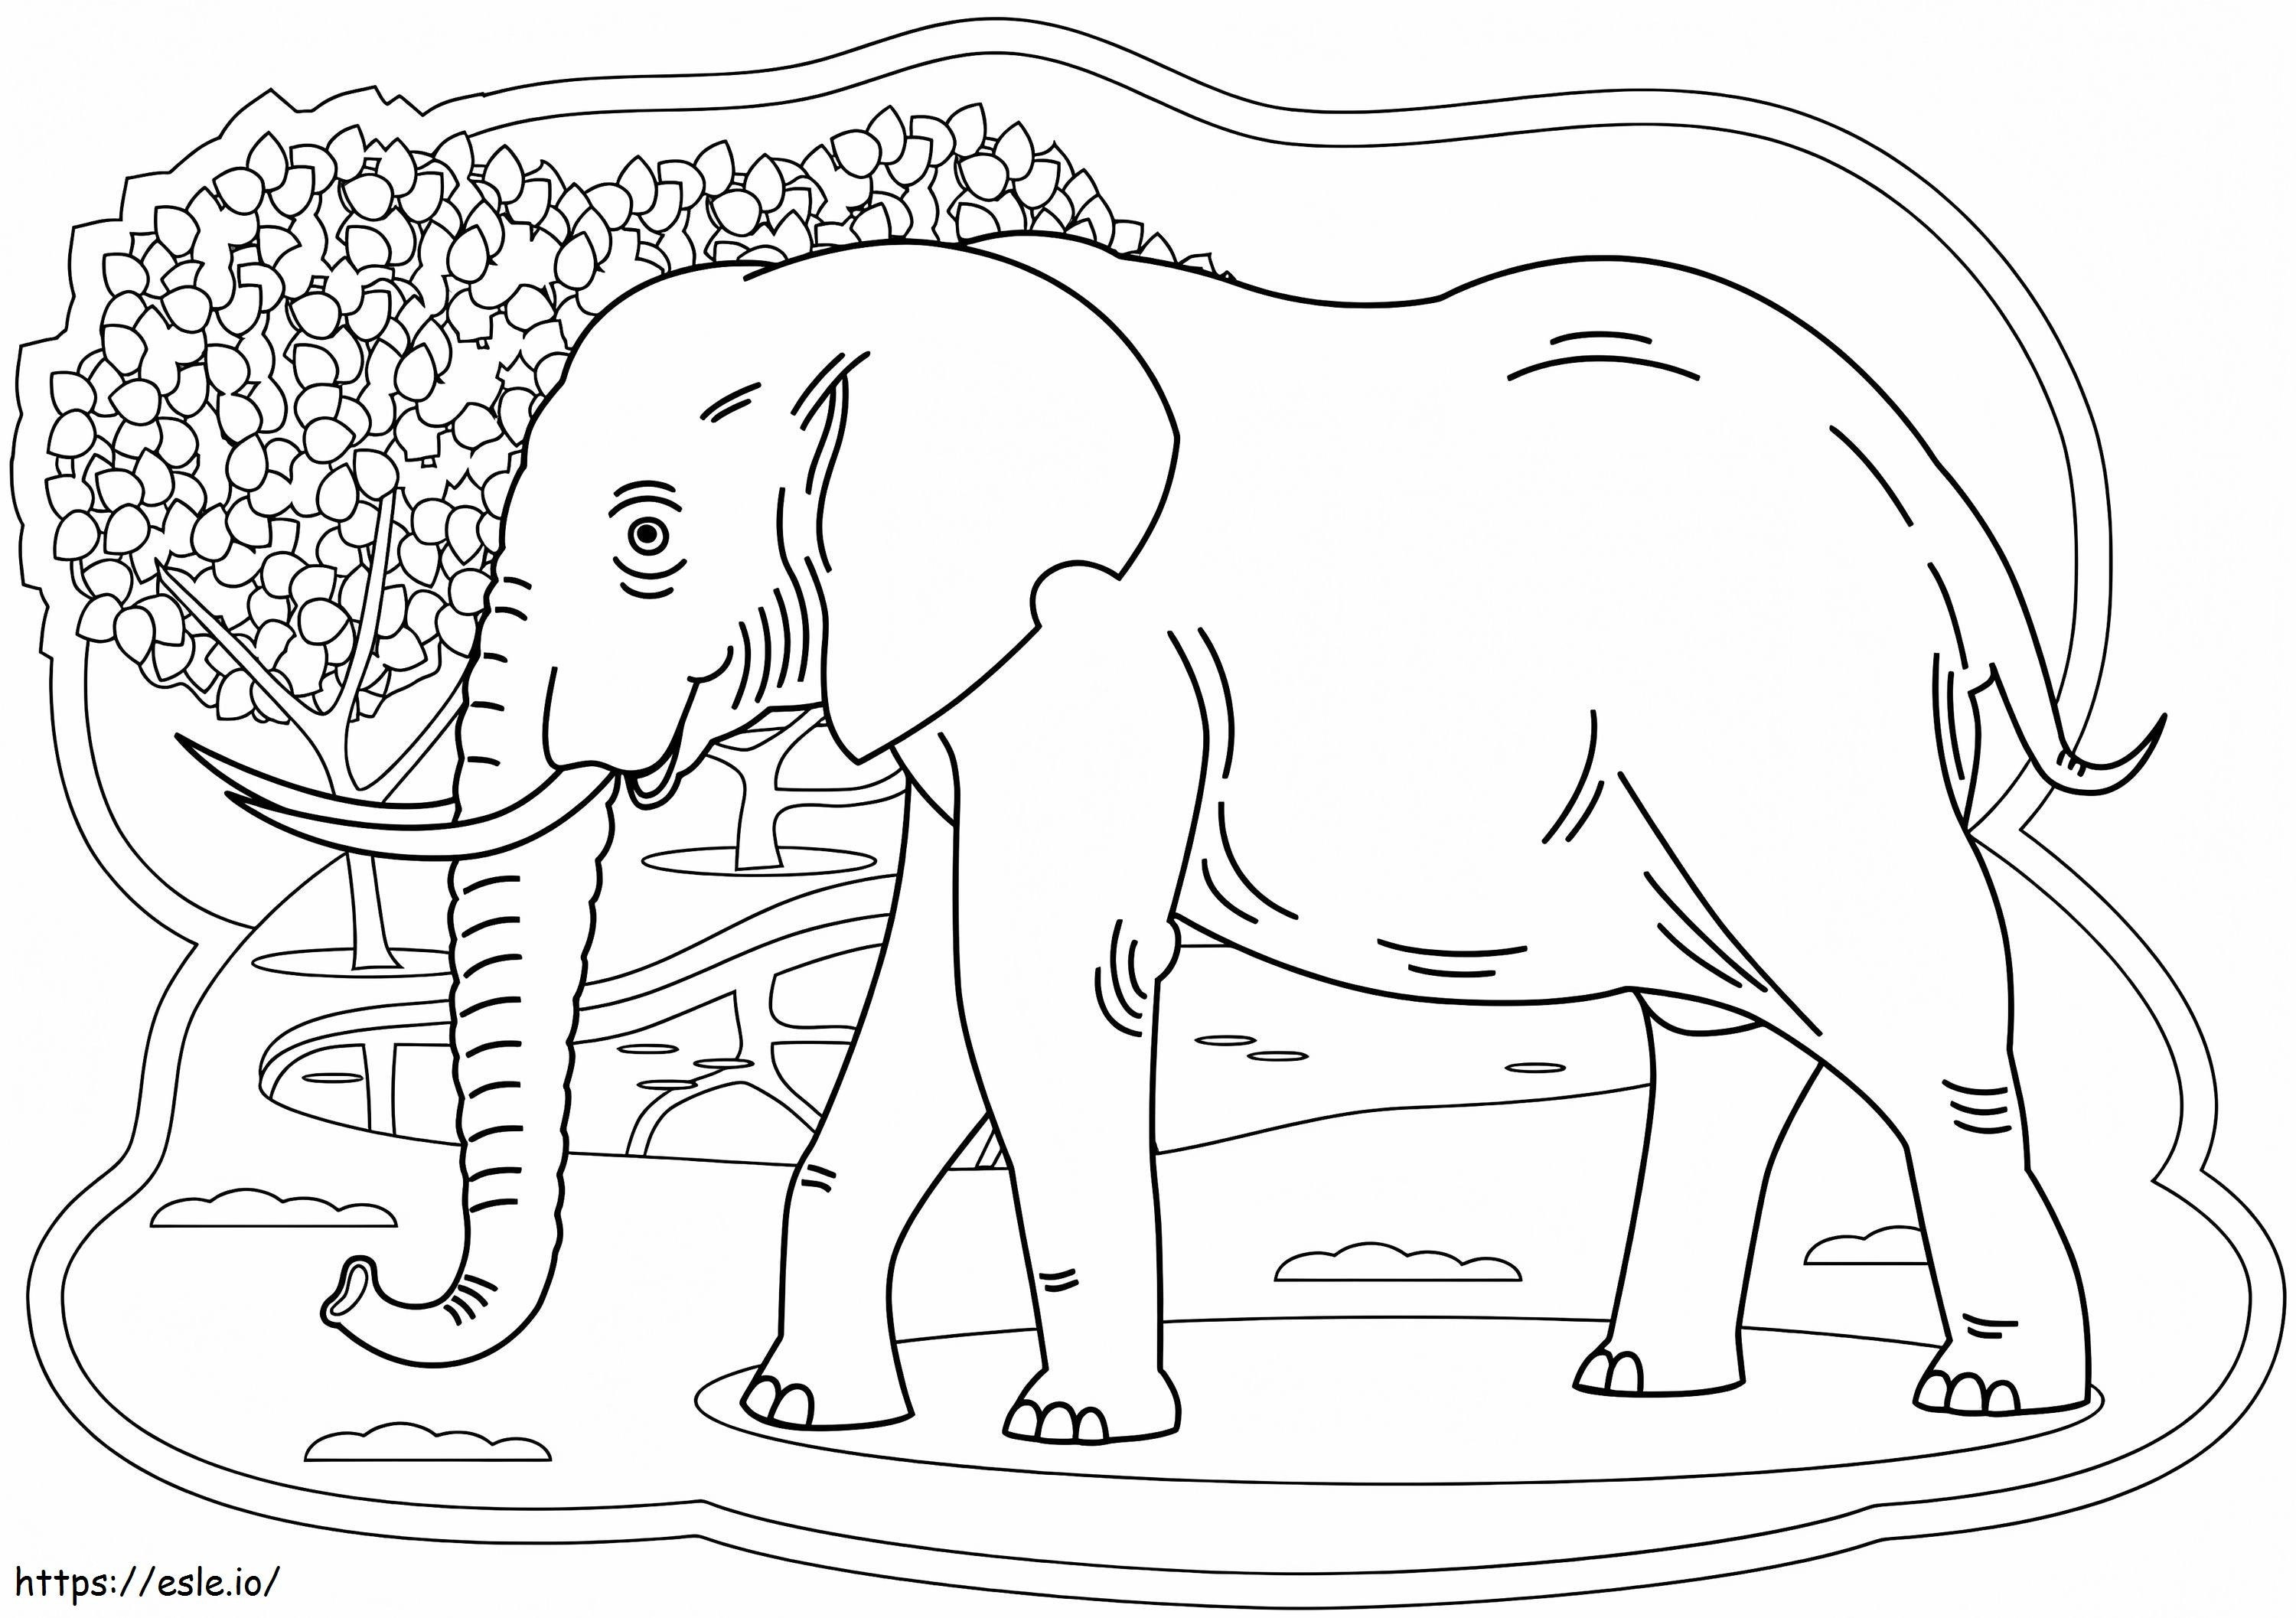 Free Elephant coloring page